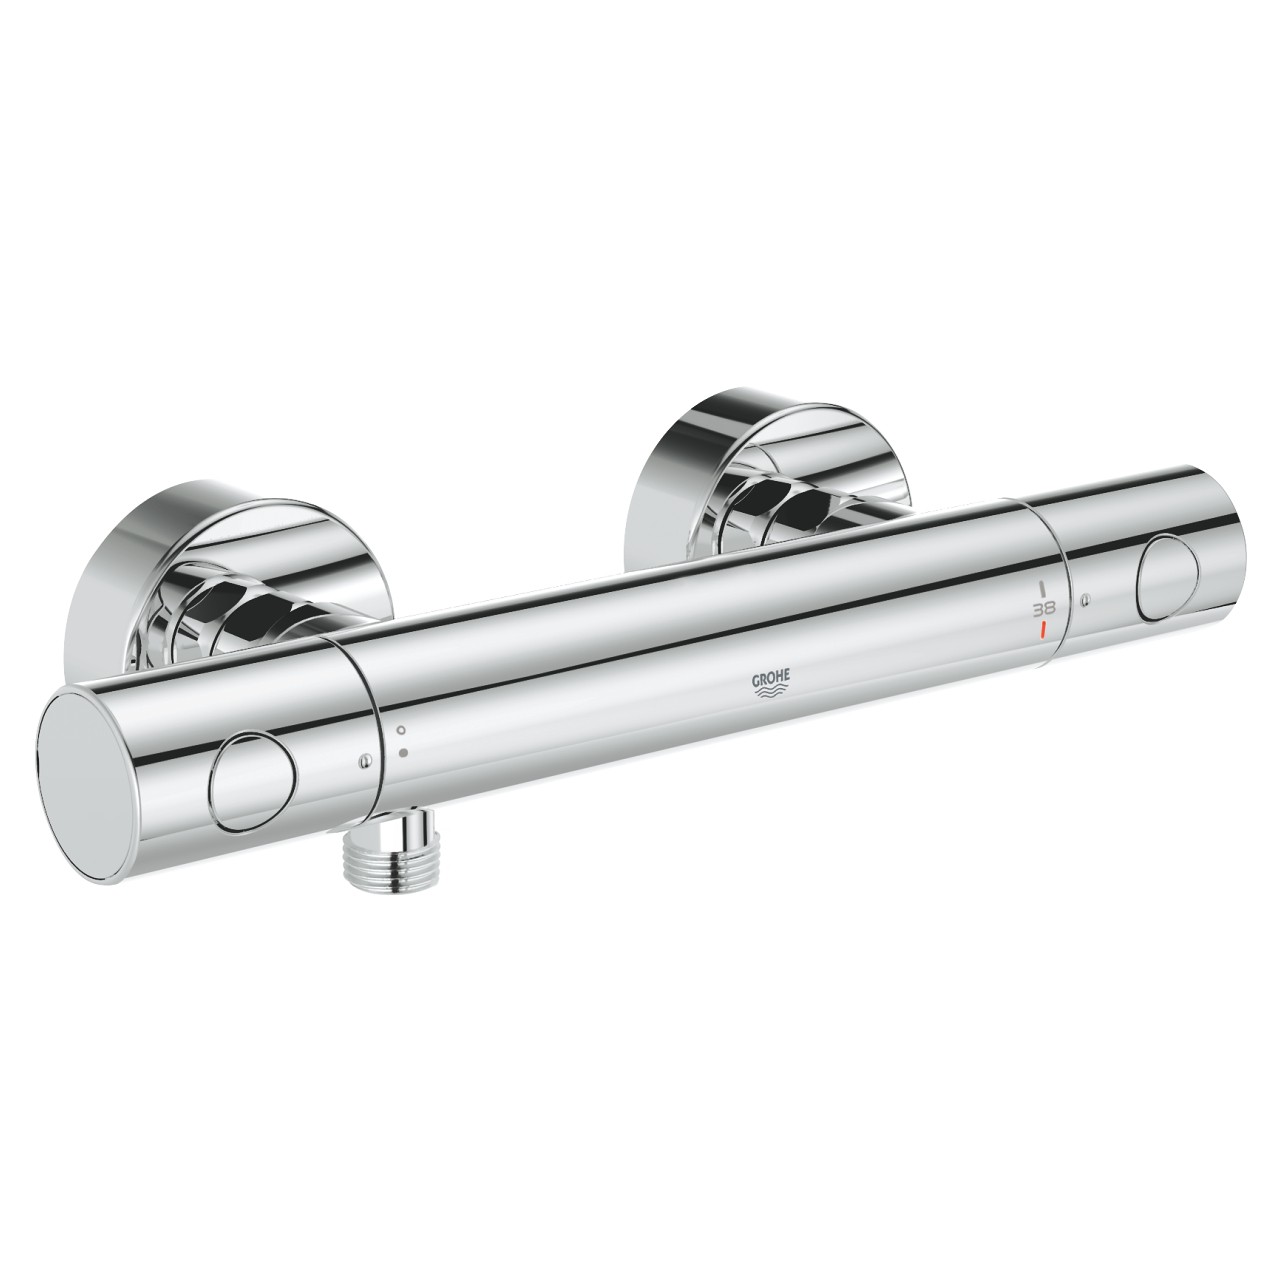 Thermostatmischer Grohe Grohtherm 1000 Cosmopolitan M fuer Dusche, chrom - 34065002